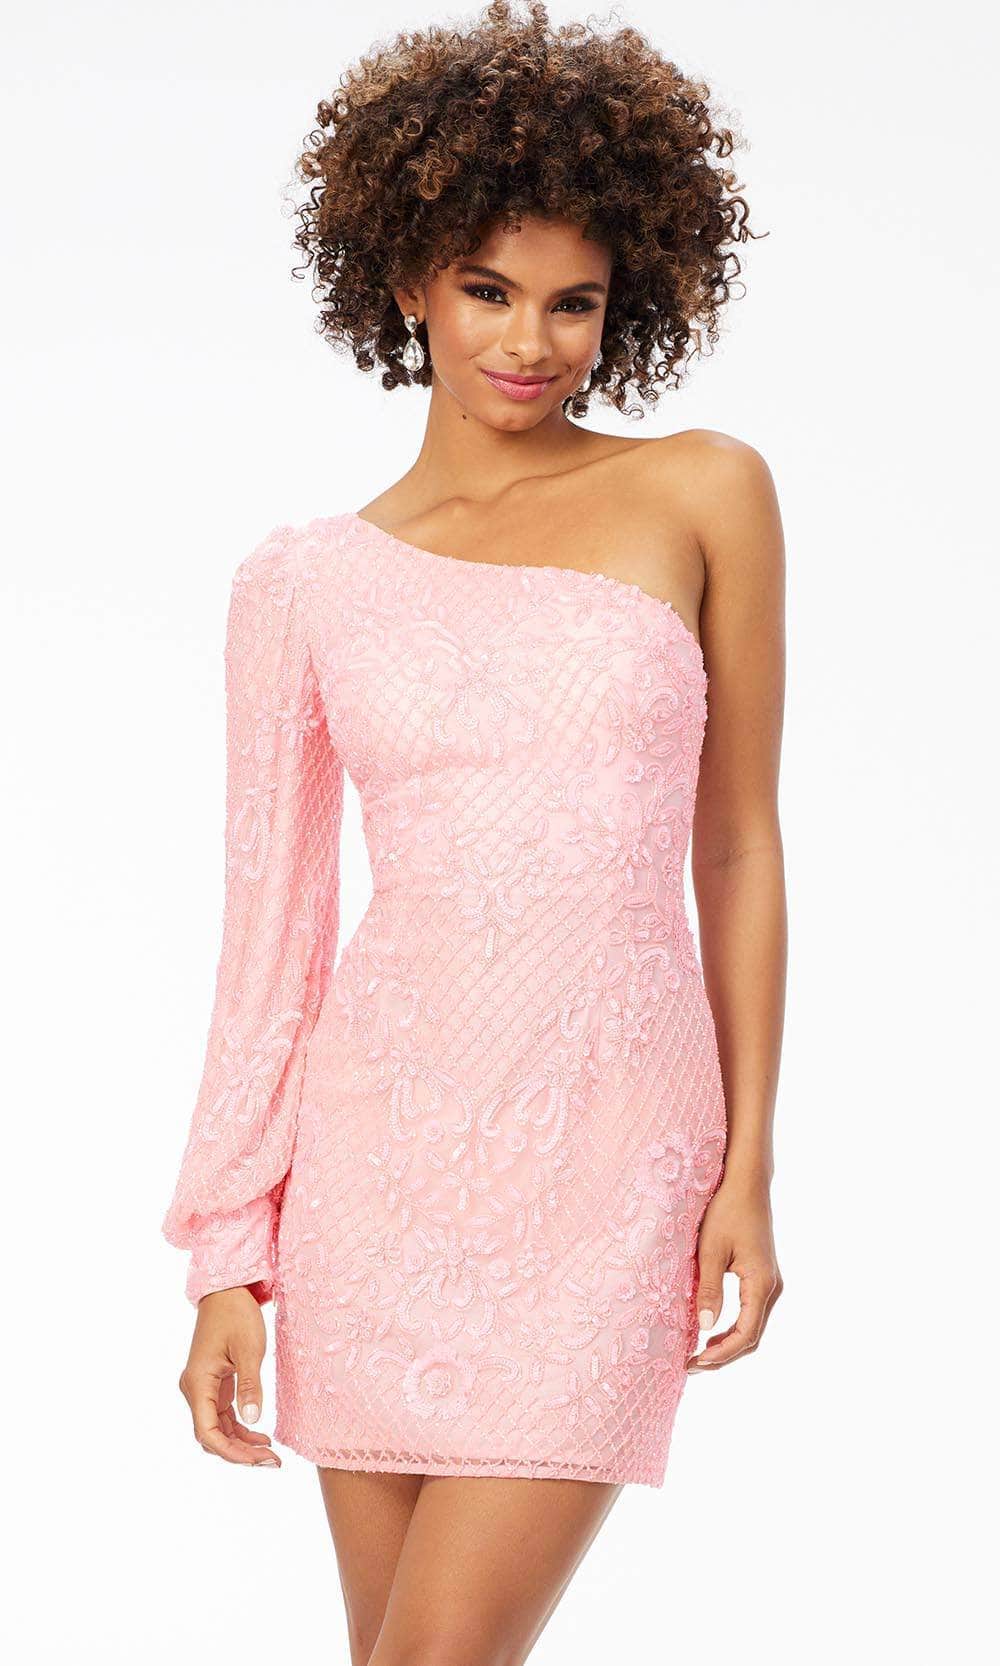 Ashley Lauren 4497 - One Sleeved Fitted Cocktail Dress Cocktail Dresses 8 /Candy Pink